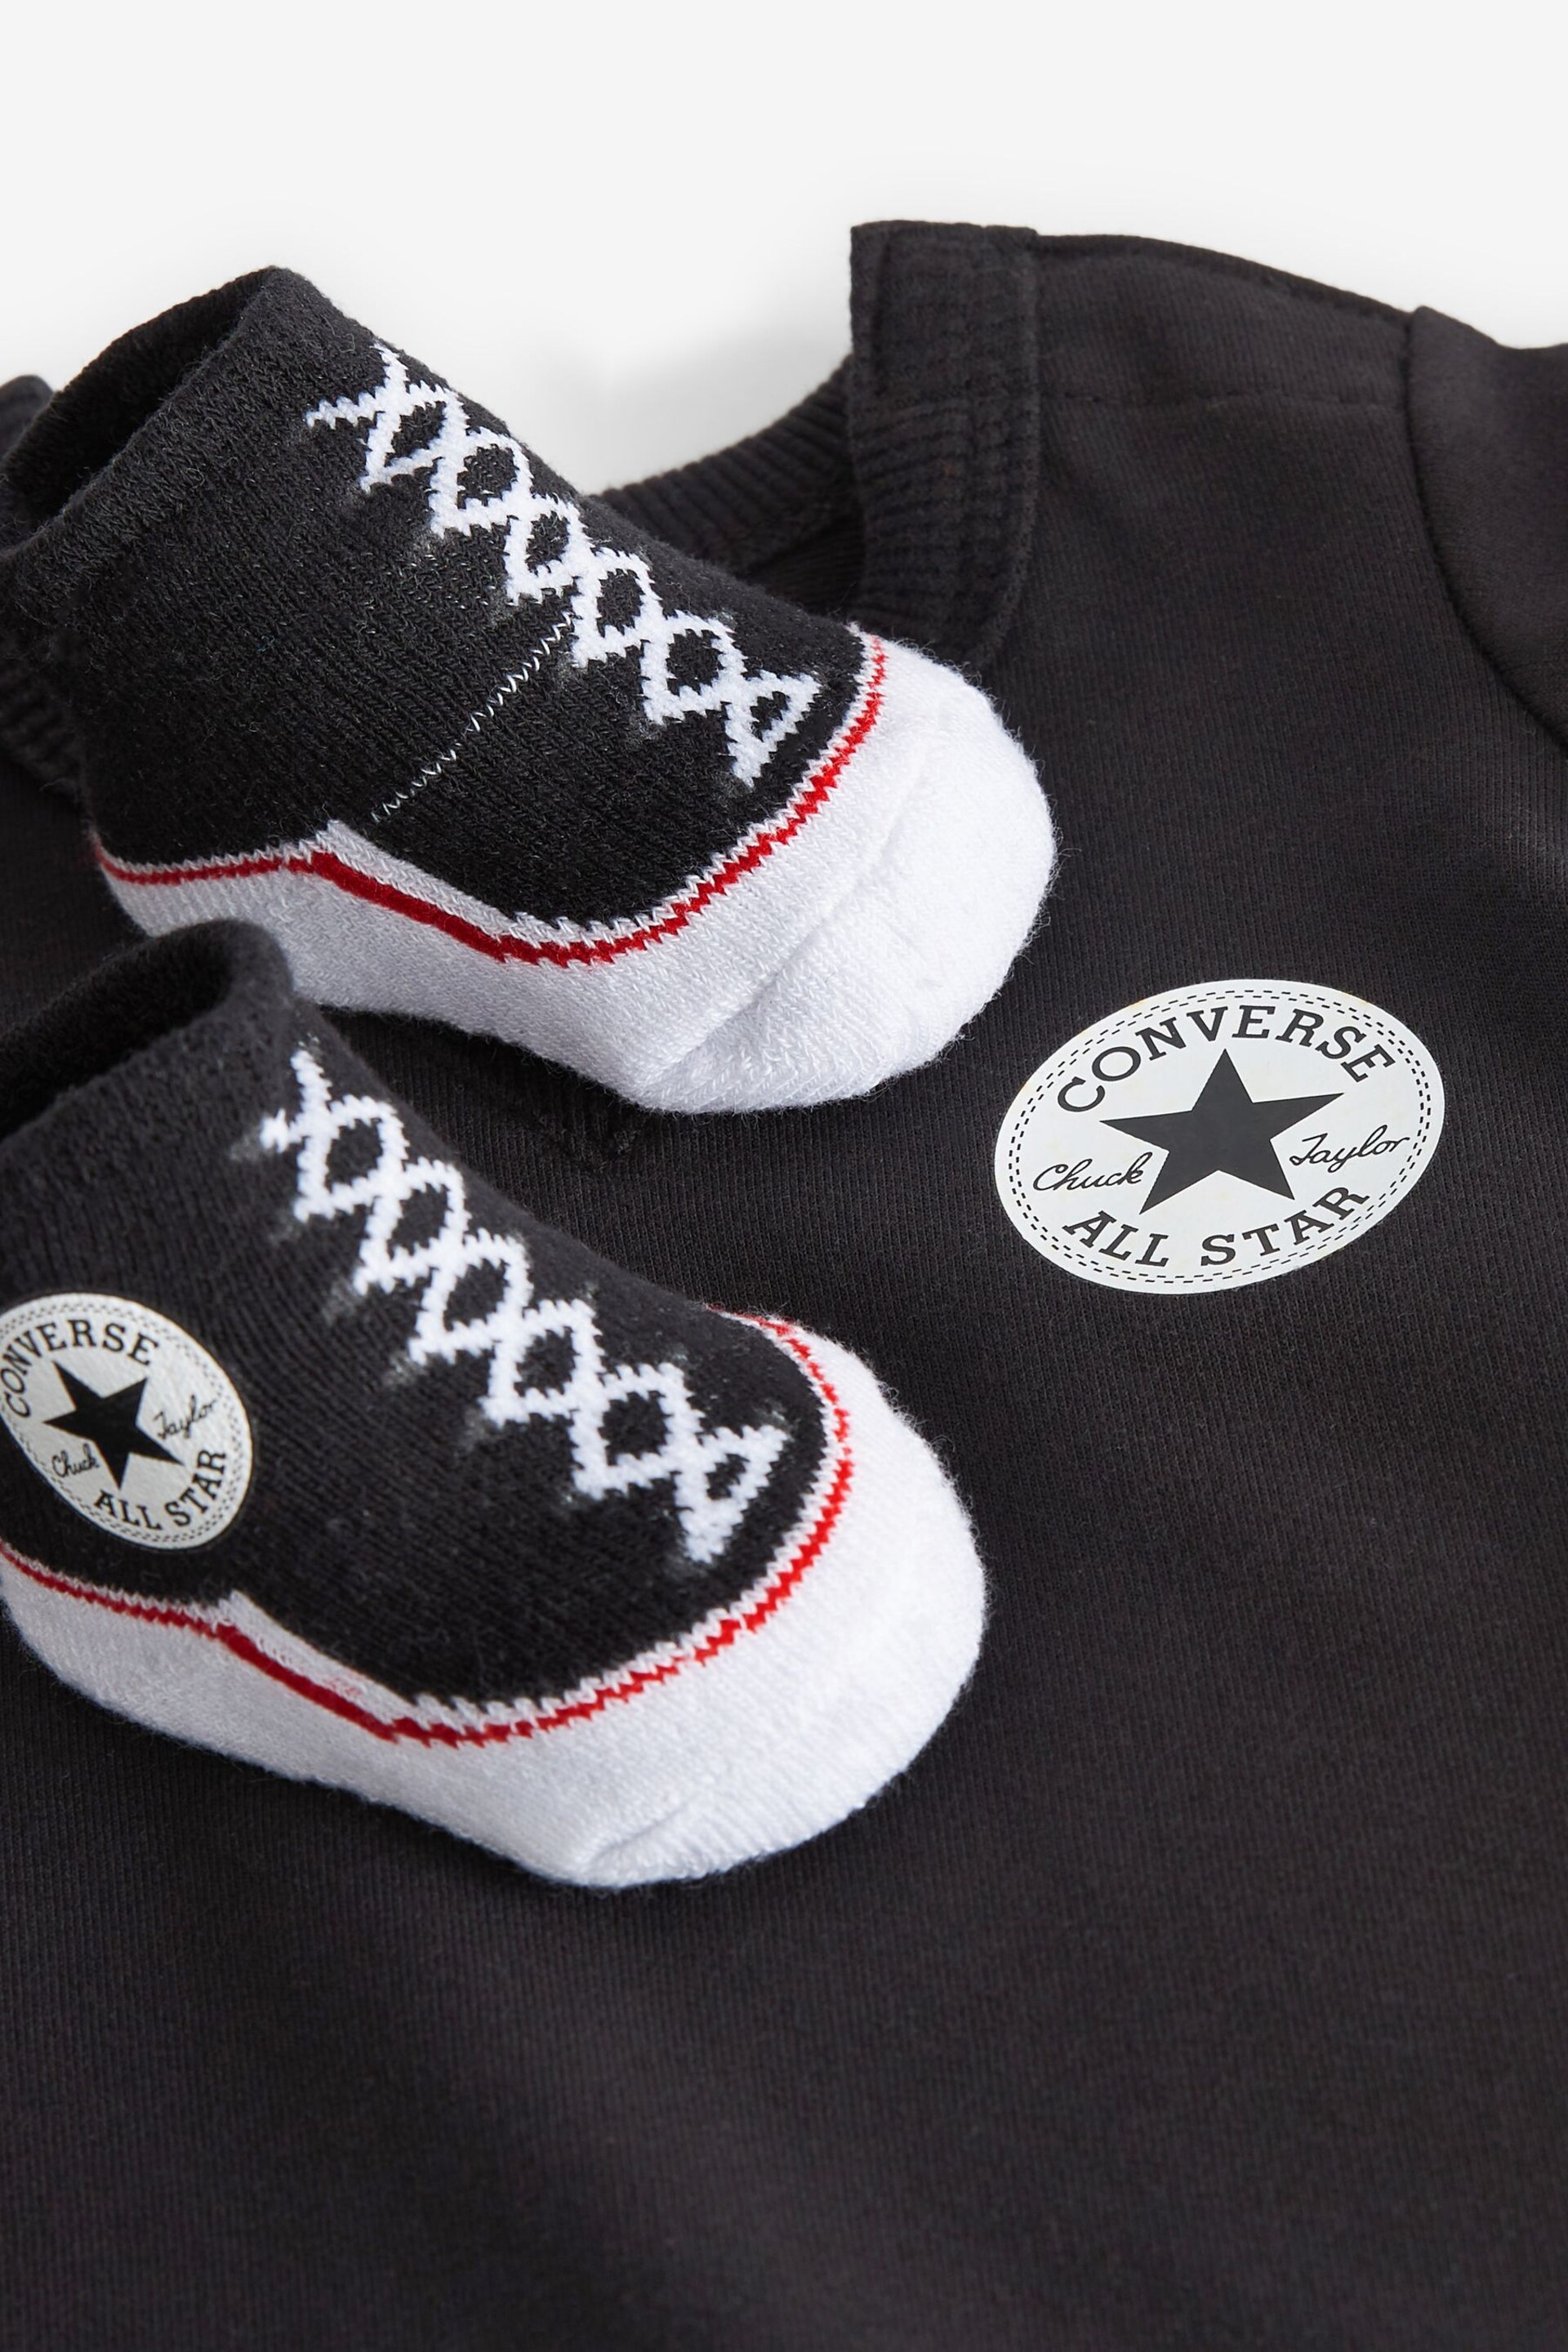 Converse Black Romper and Bootie Baby Set - Image 3 of 3